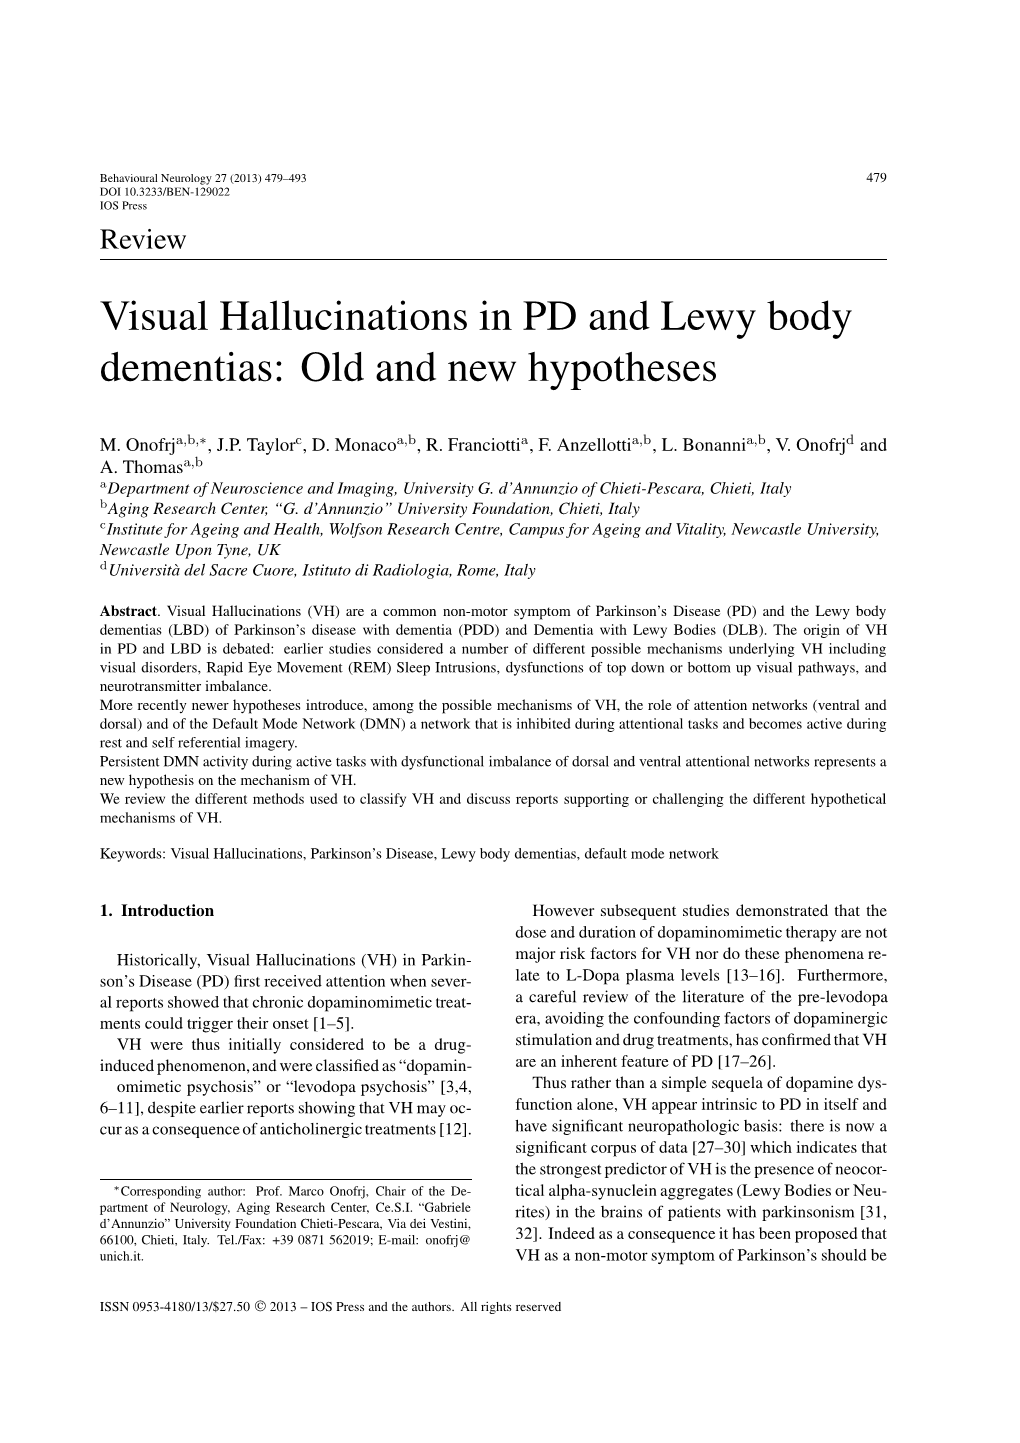 Visual Hallucinations in PD and Lewy Body Dementias: Old and New Hypotheses